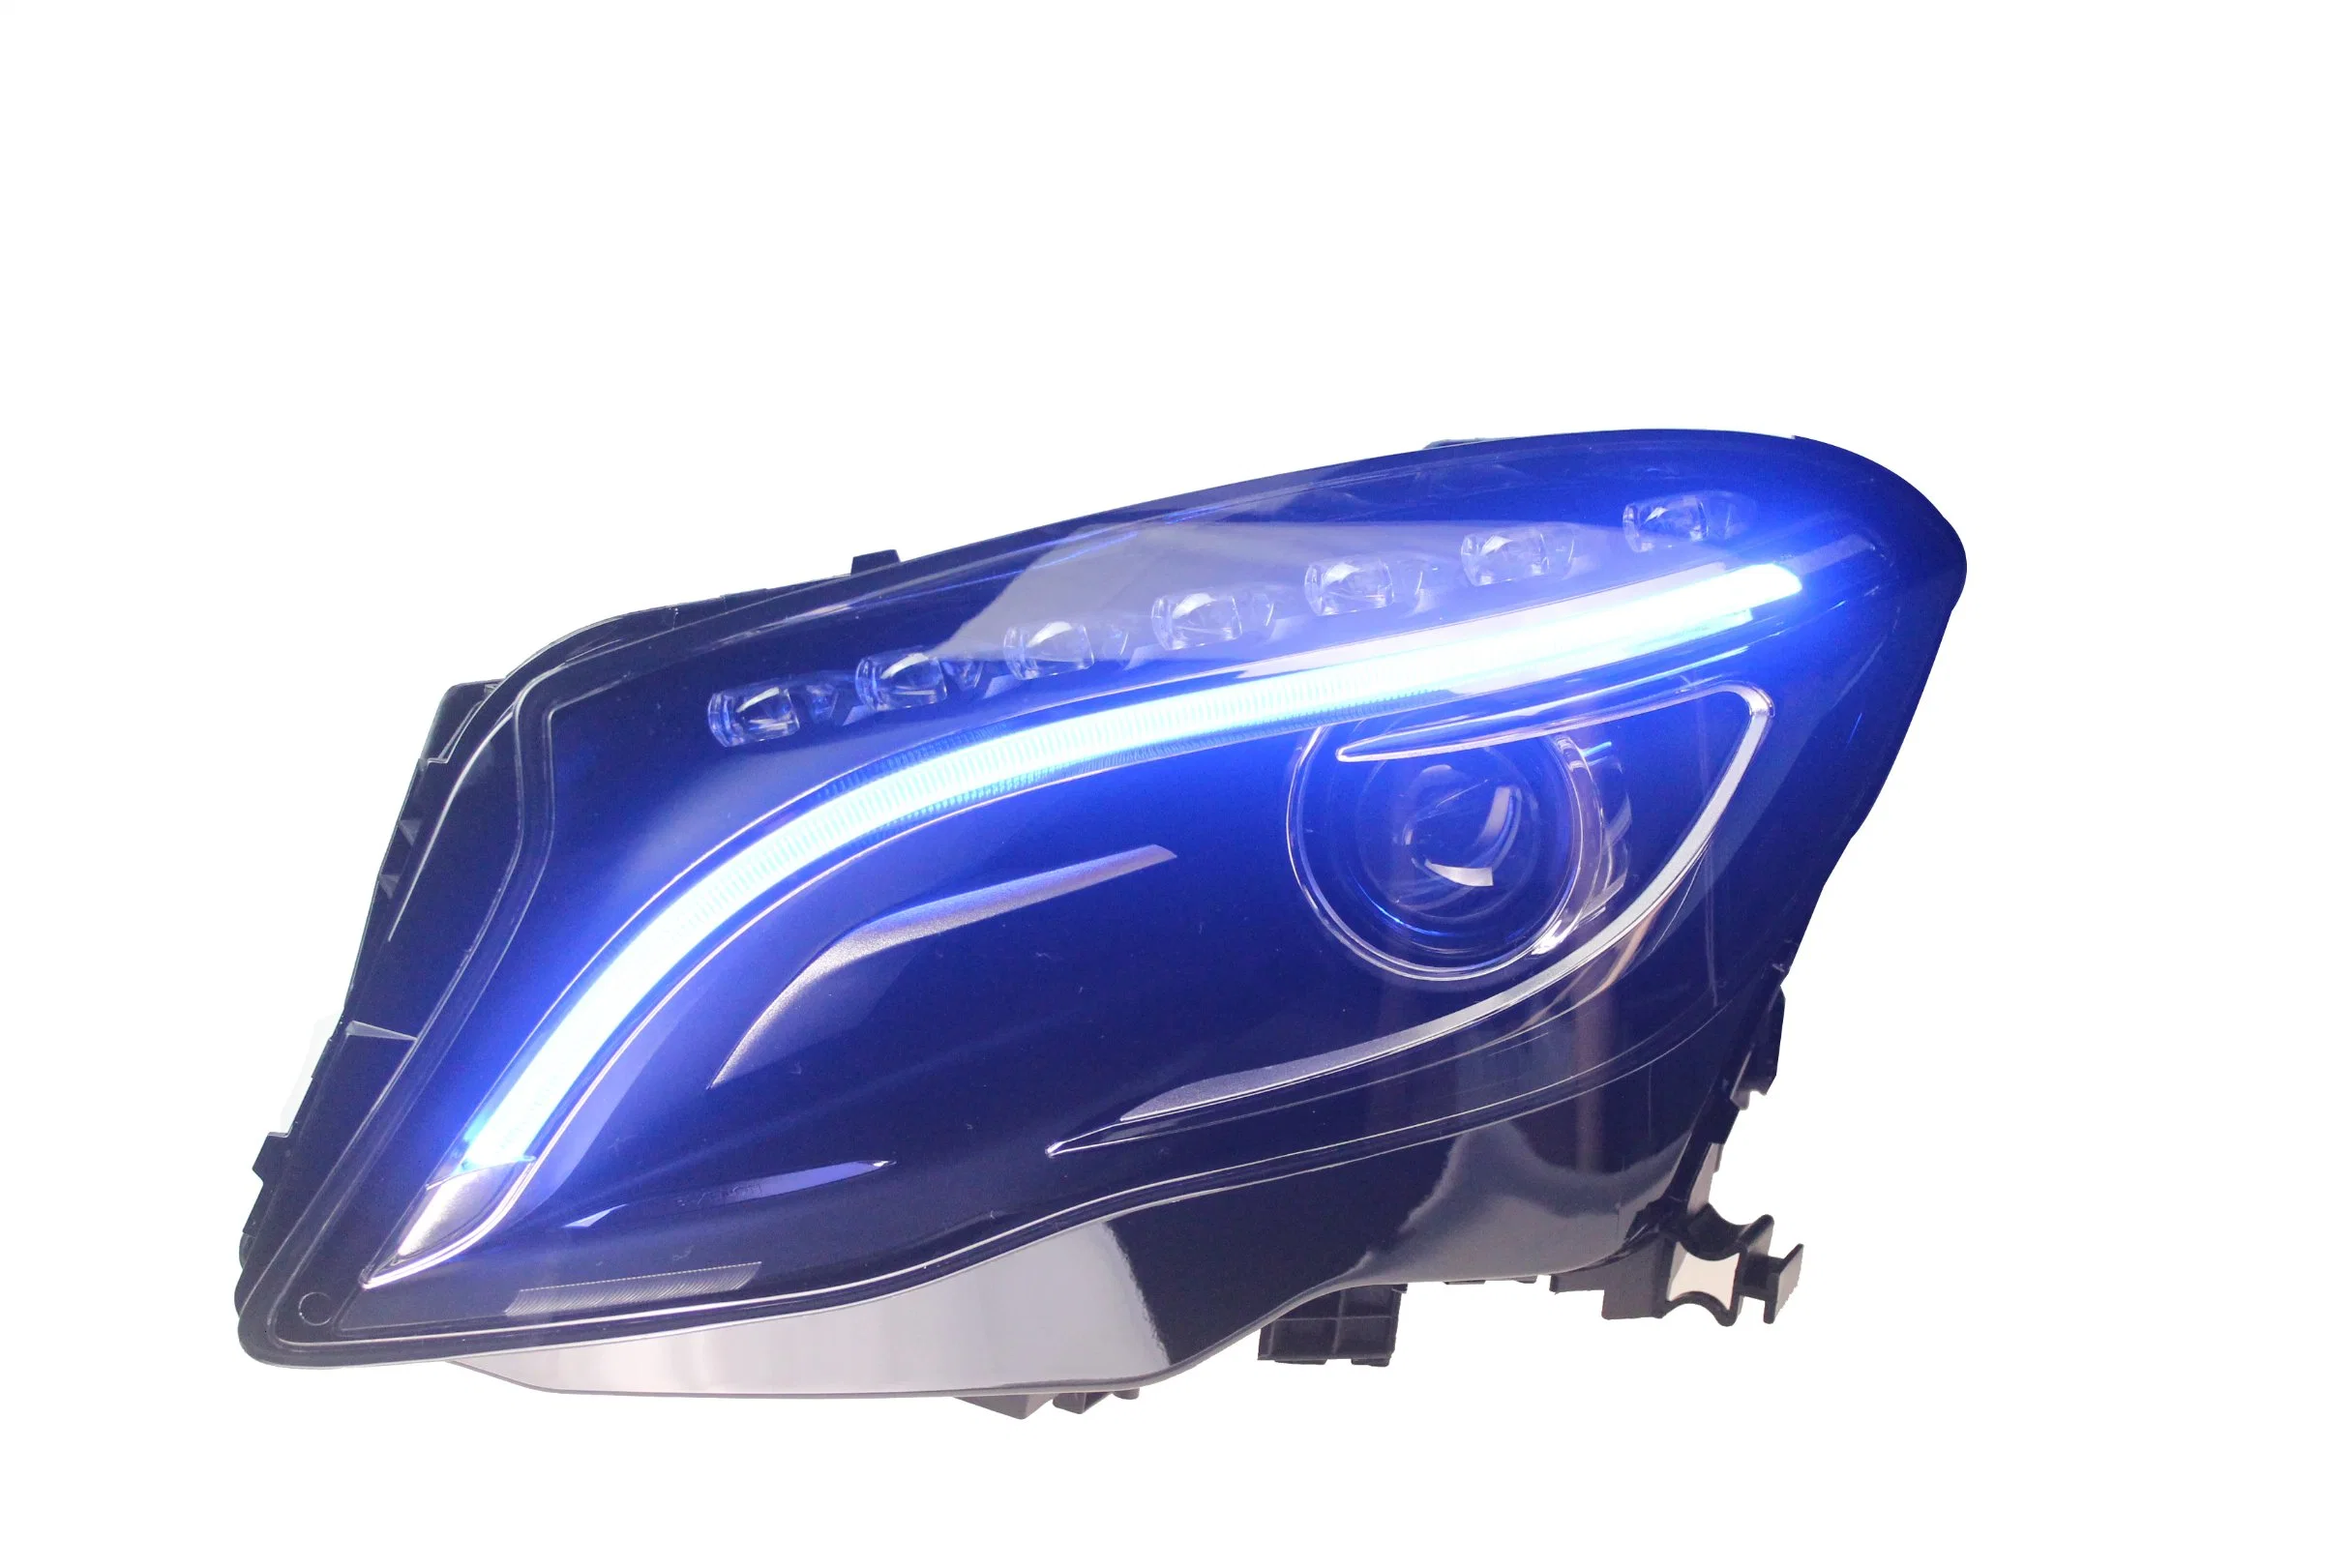 New Listing High Quality Non-Destructive Installation Headlight Assembly HID & LED Headlight for Mercedes Benz Cla